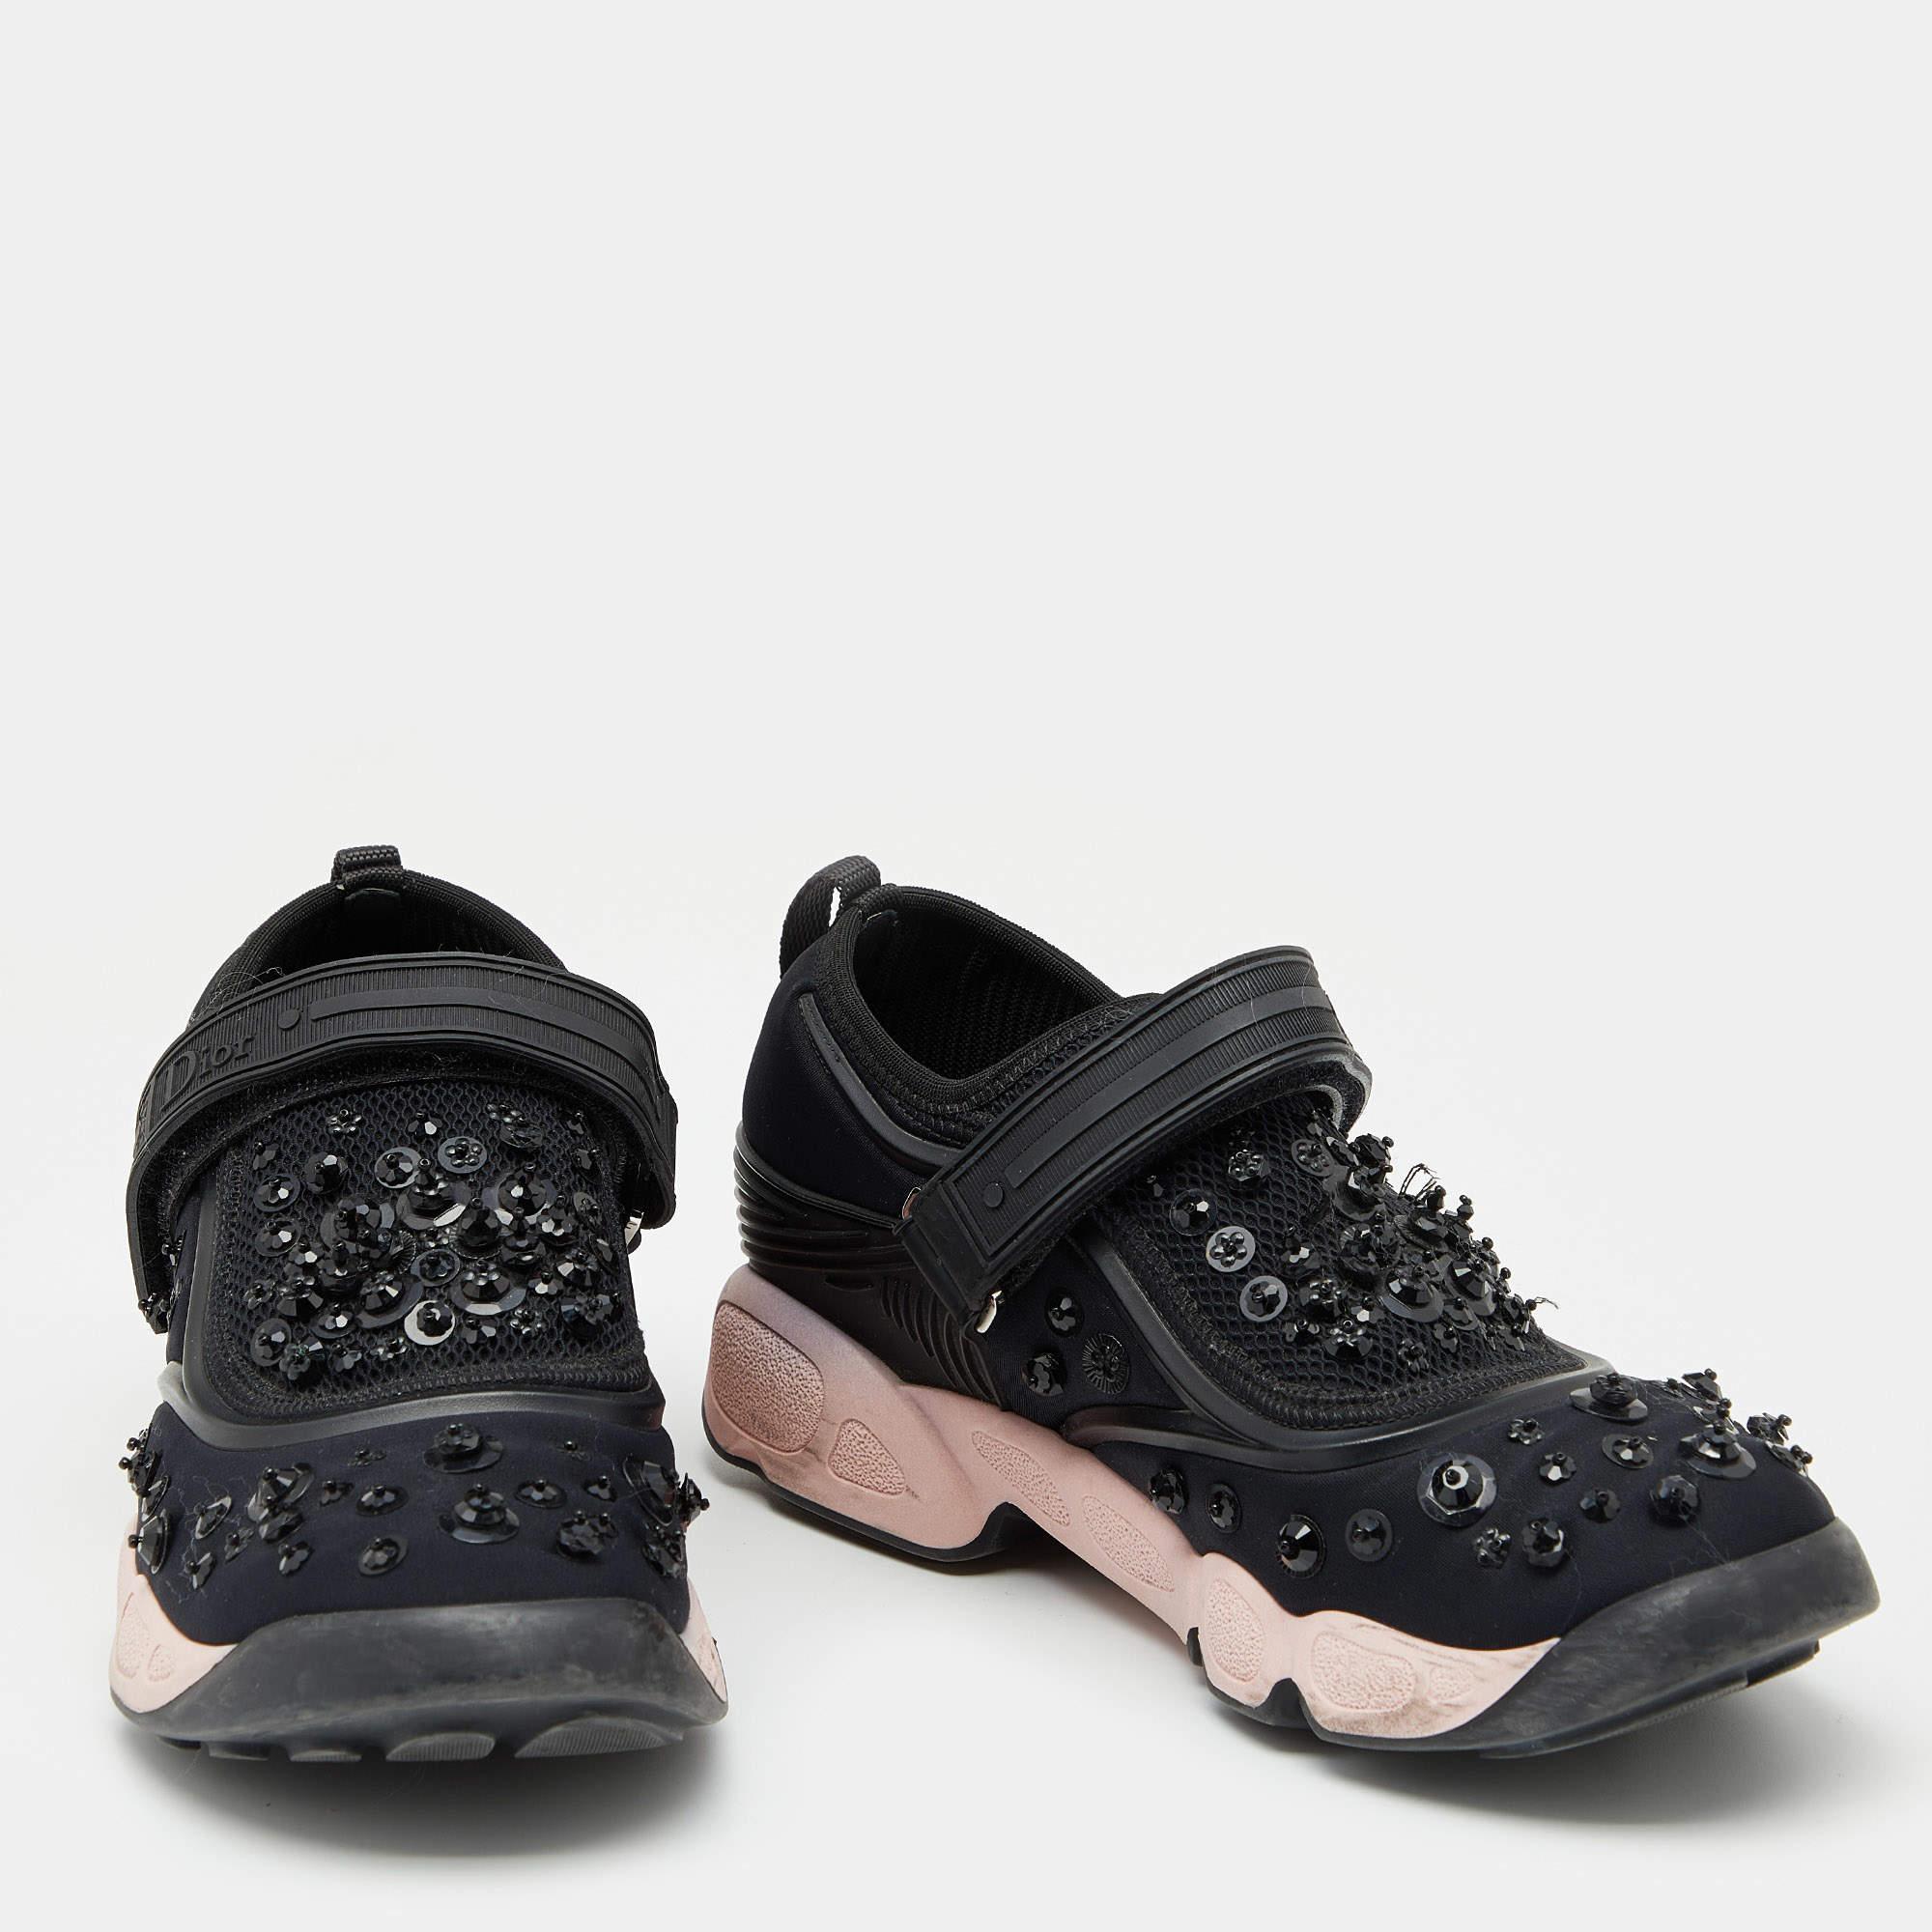 Dior Black Neoprene And Mesh Fusion Embellished Velcro Strap Sneakers Size 36 For Sale 1